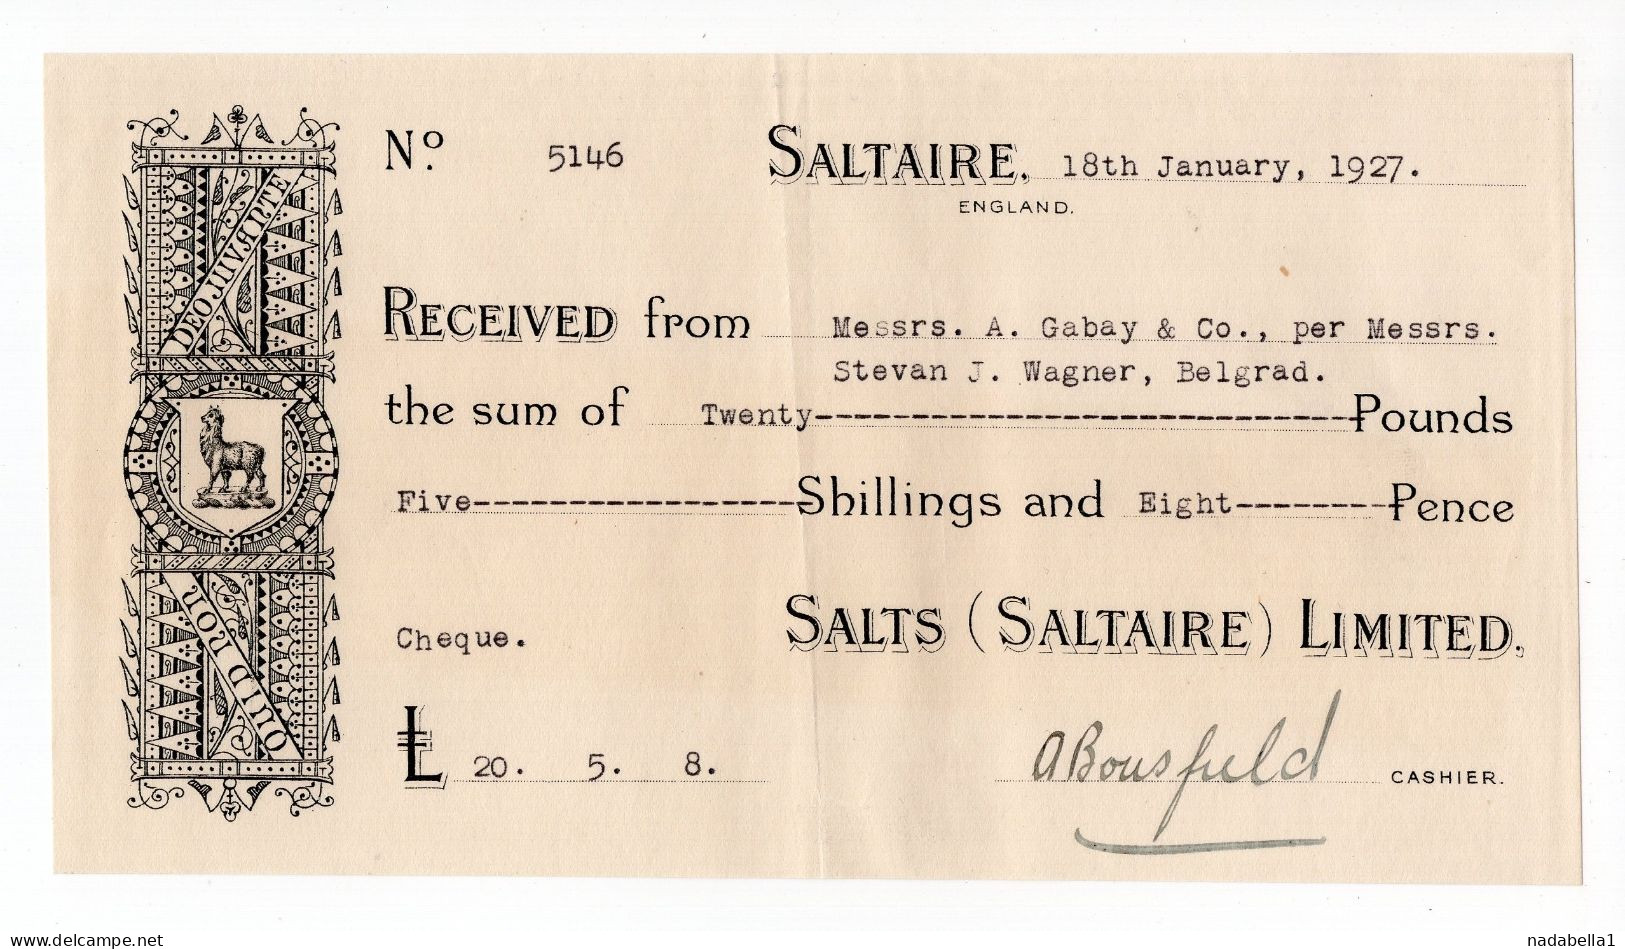 1927. UNITED KINGDOM,ENGLAND,SALTAIRE,RECEIPT FOR A CHEQUE,SALTS (SALTAIRE) LTD. ,LAWYER S.J. WAGNER,SERBIA - Cheques & Traveler's Cheques